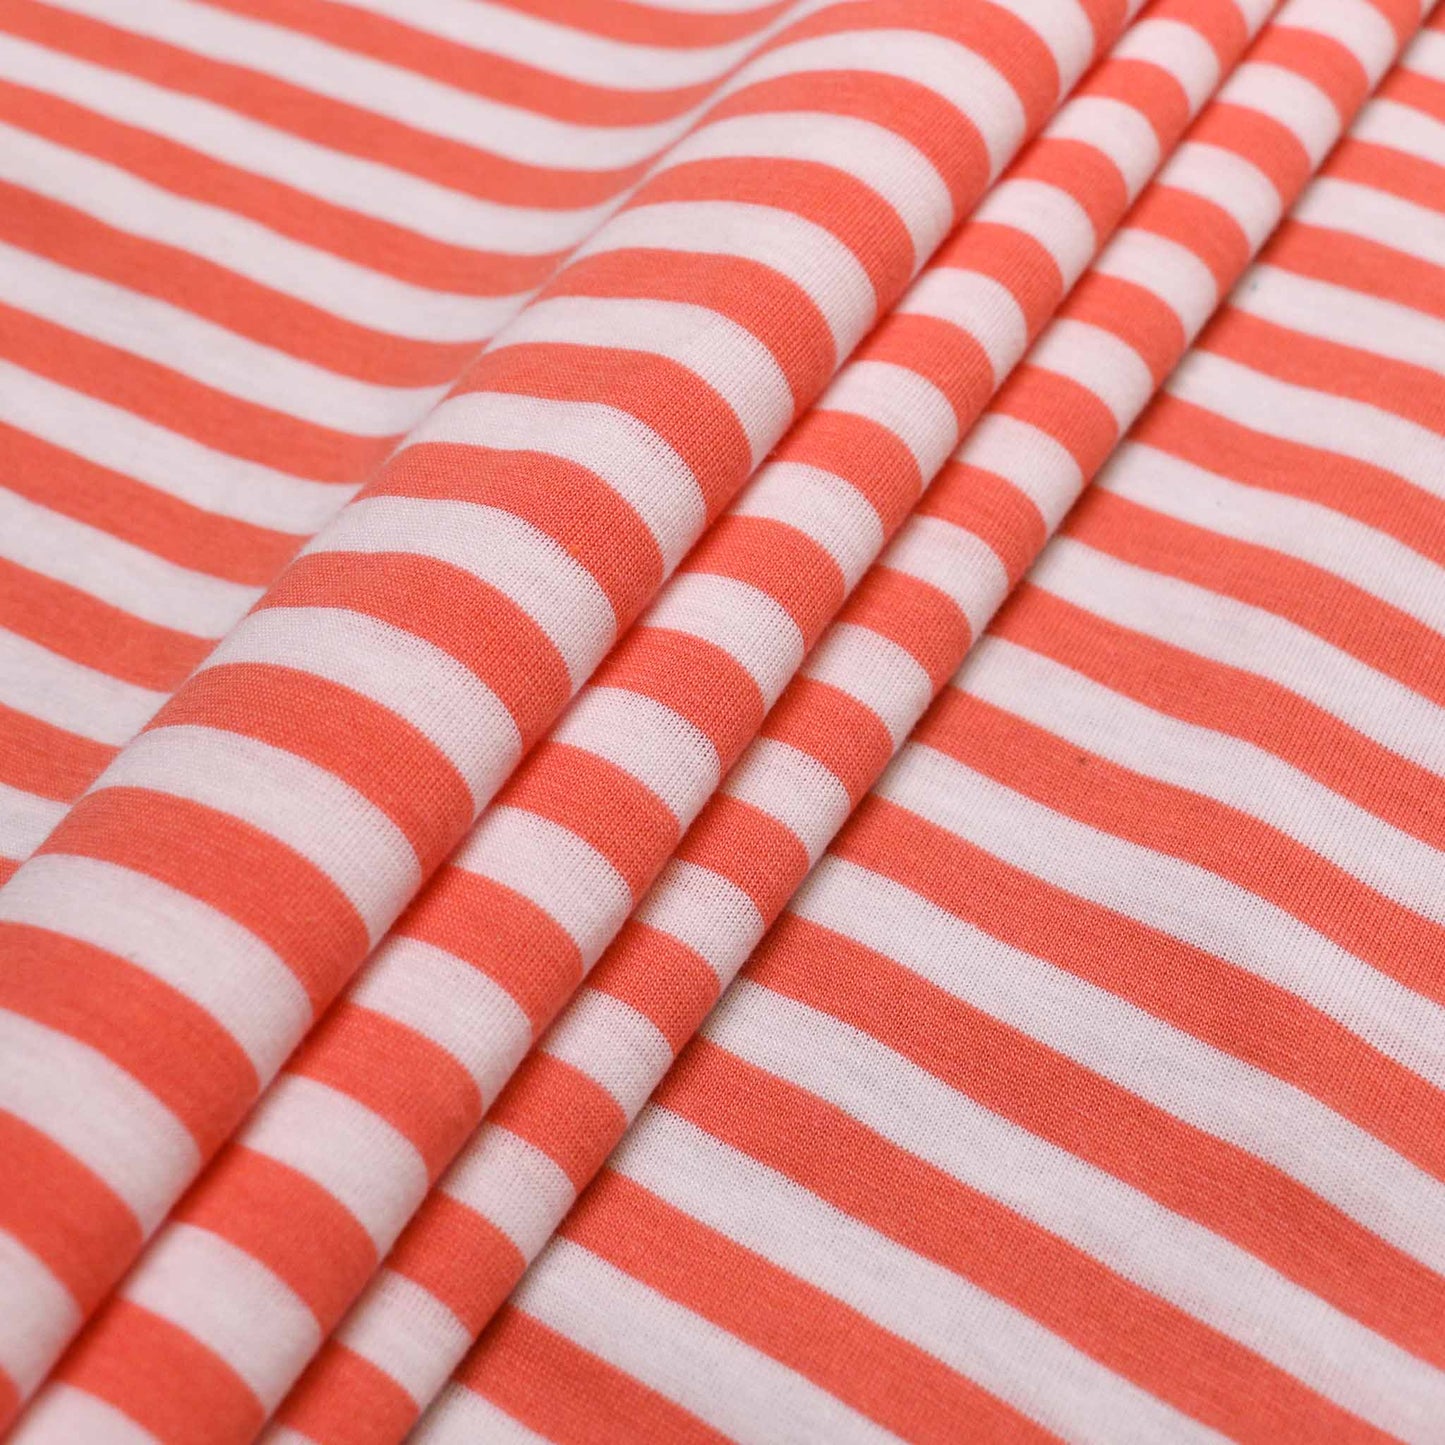 striped polycotton coral orange coloured jersey fabric from cloth control